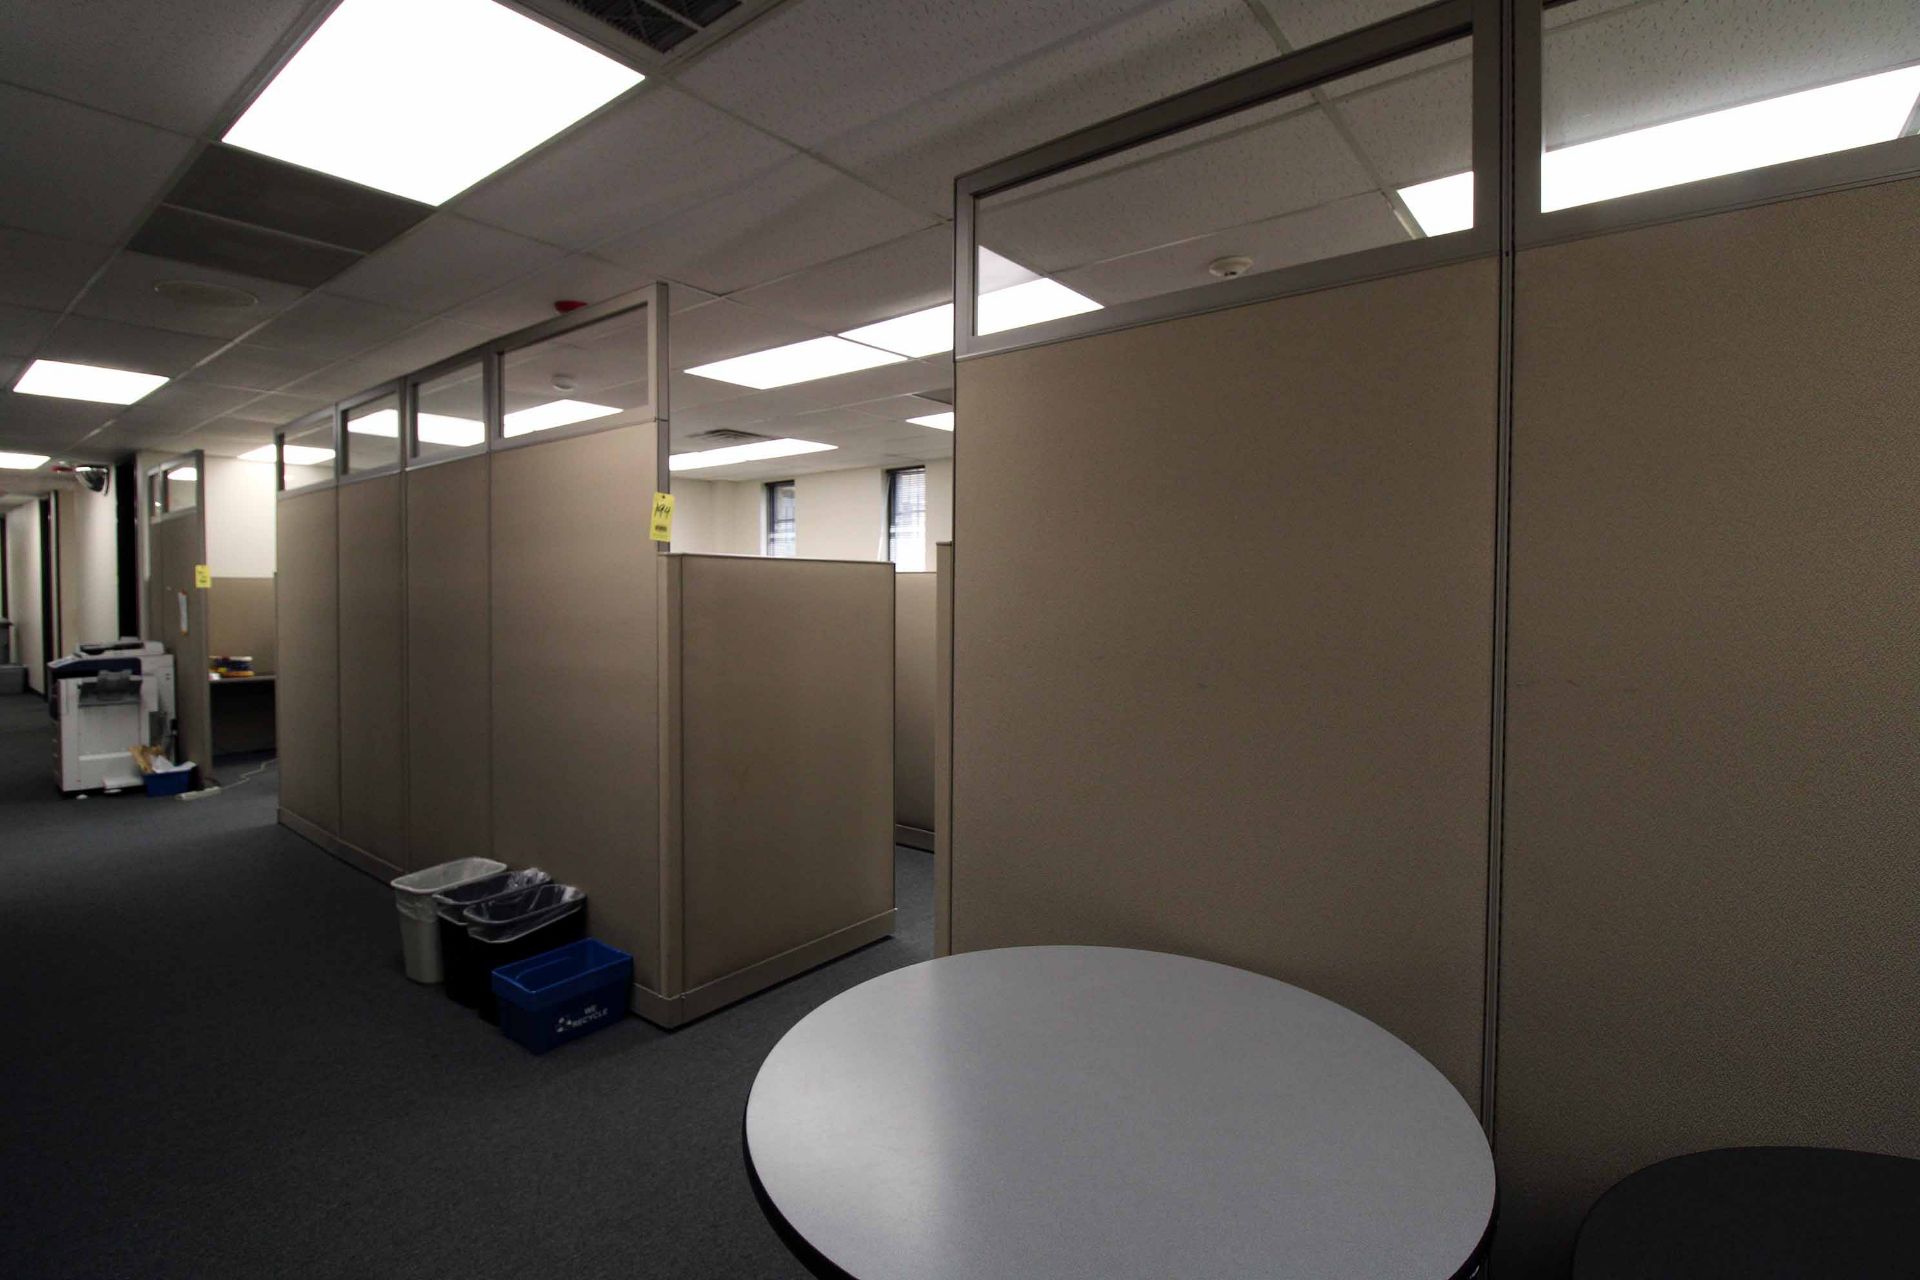 LOT OF CUBICLE STATIONS: (10) stations w/ dividing wall (Note: no computer equipment, phones or